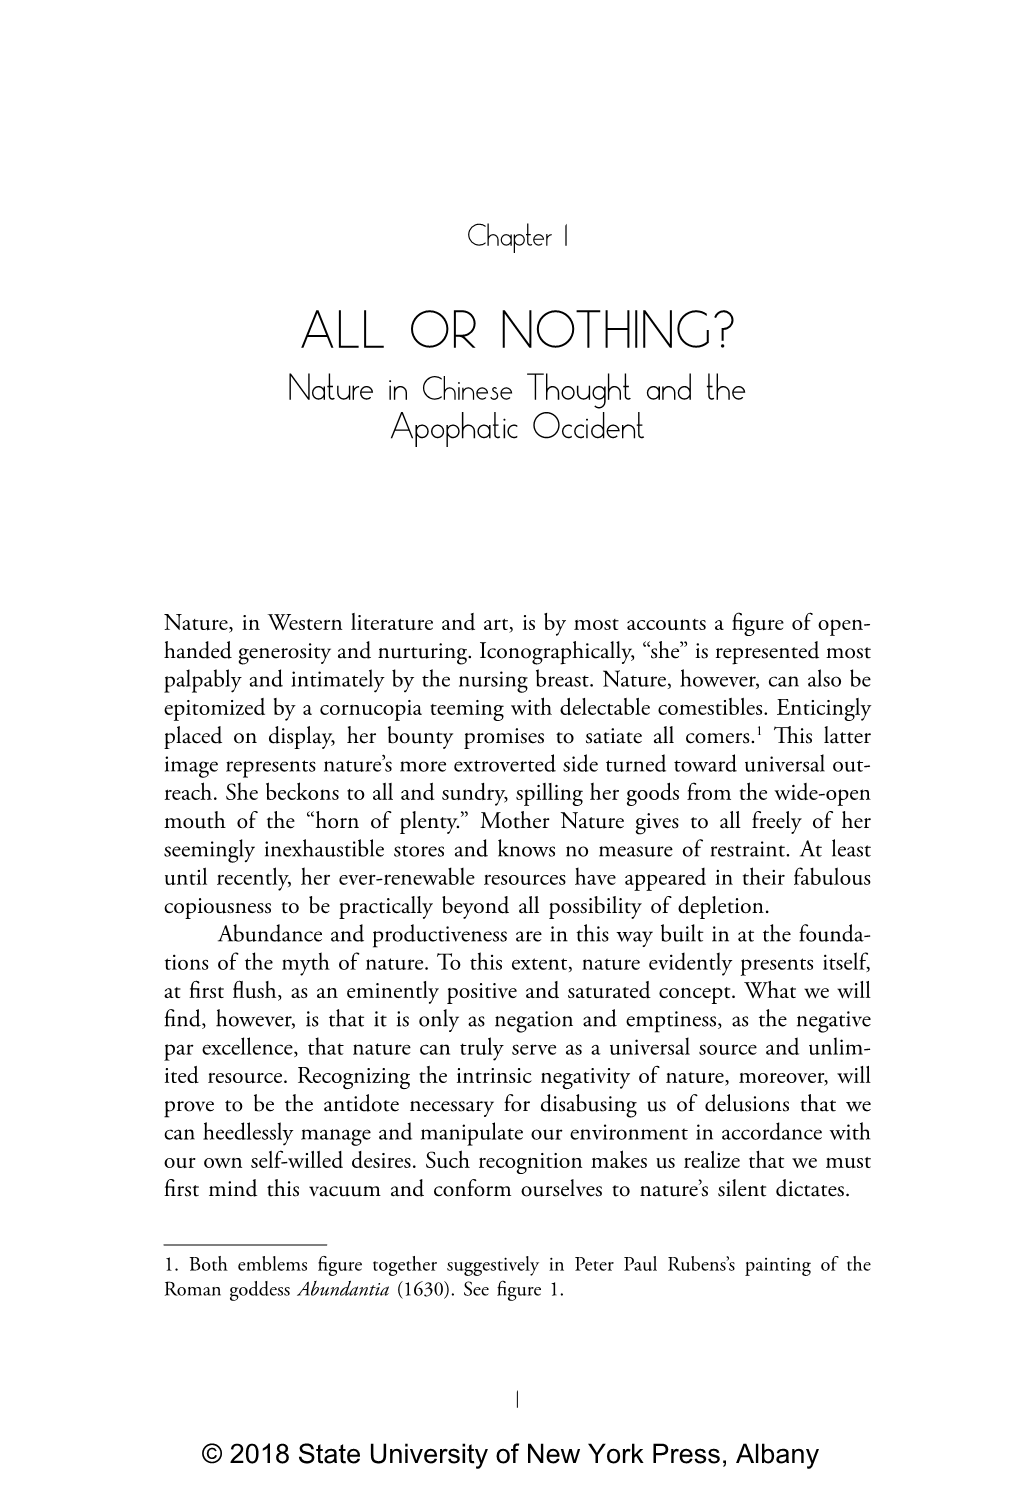 ALL OR NOTHING? Nature in Chinese Thought and the Apophatic Occident